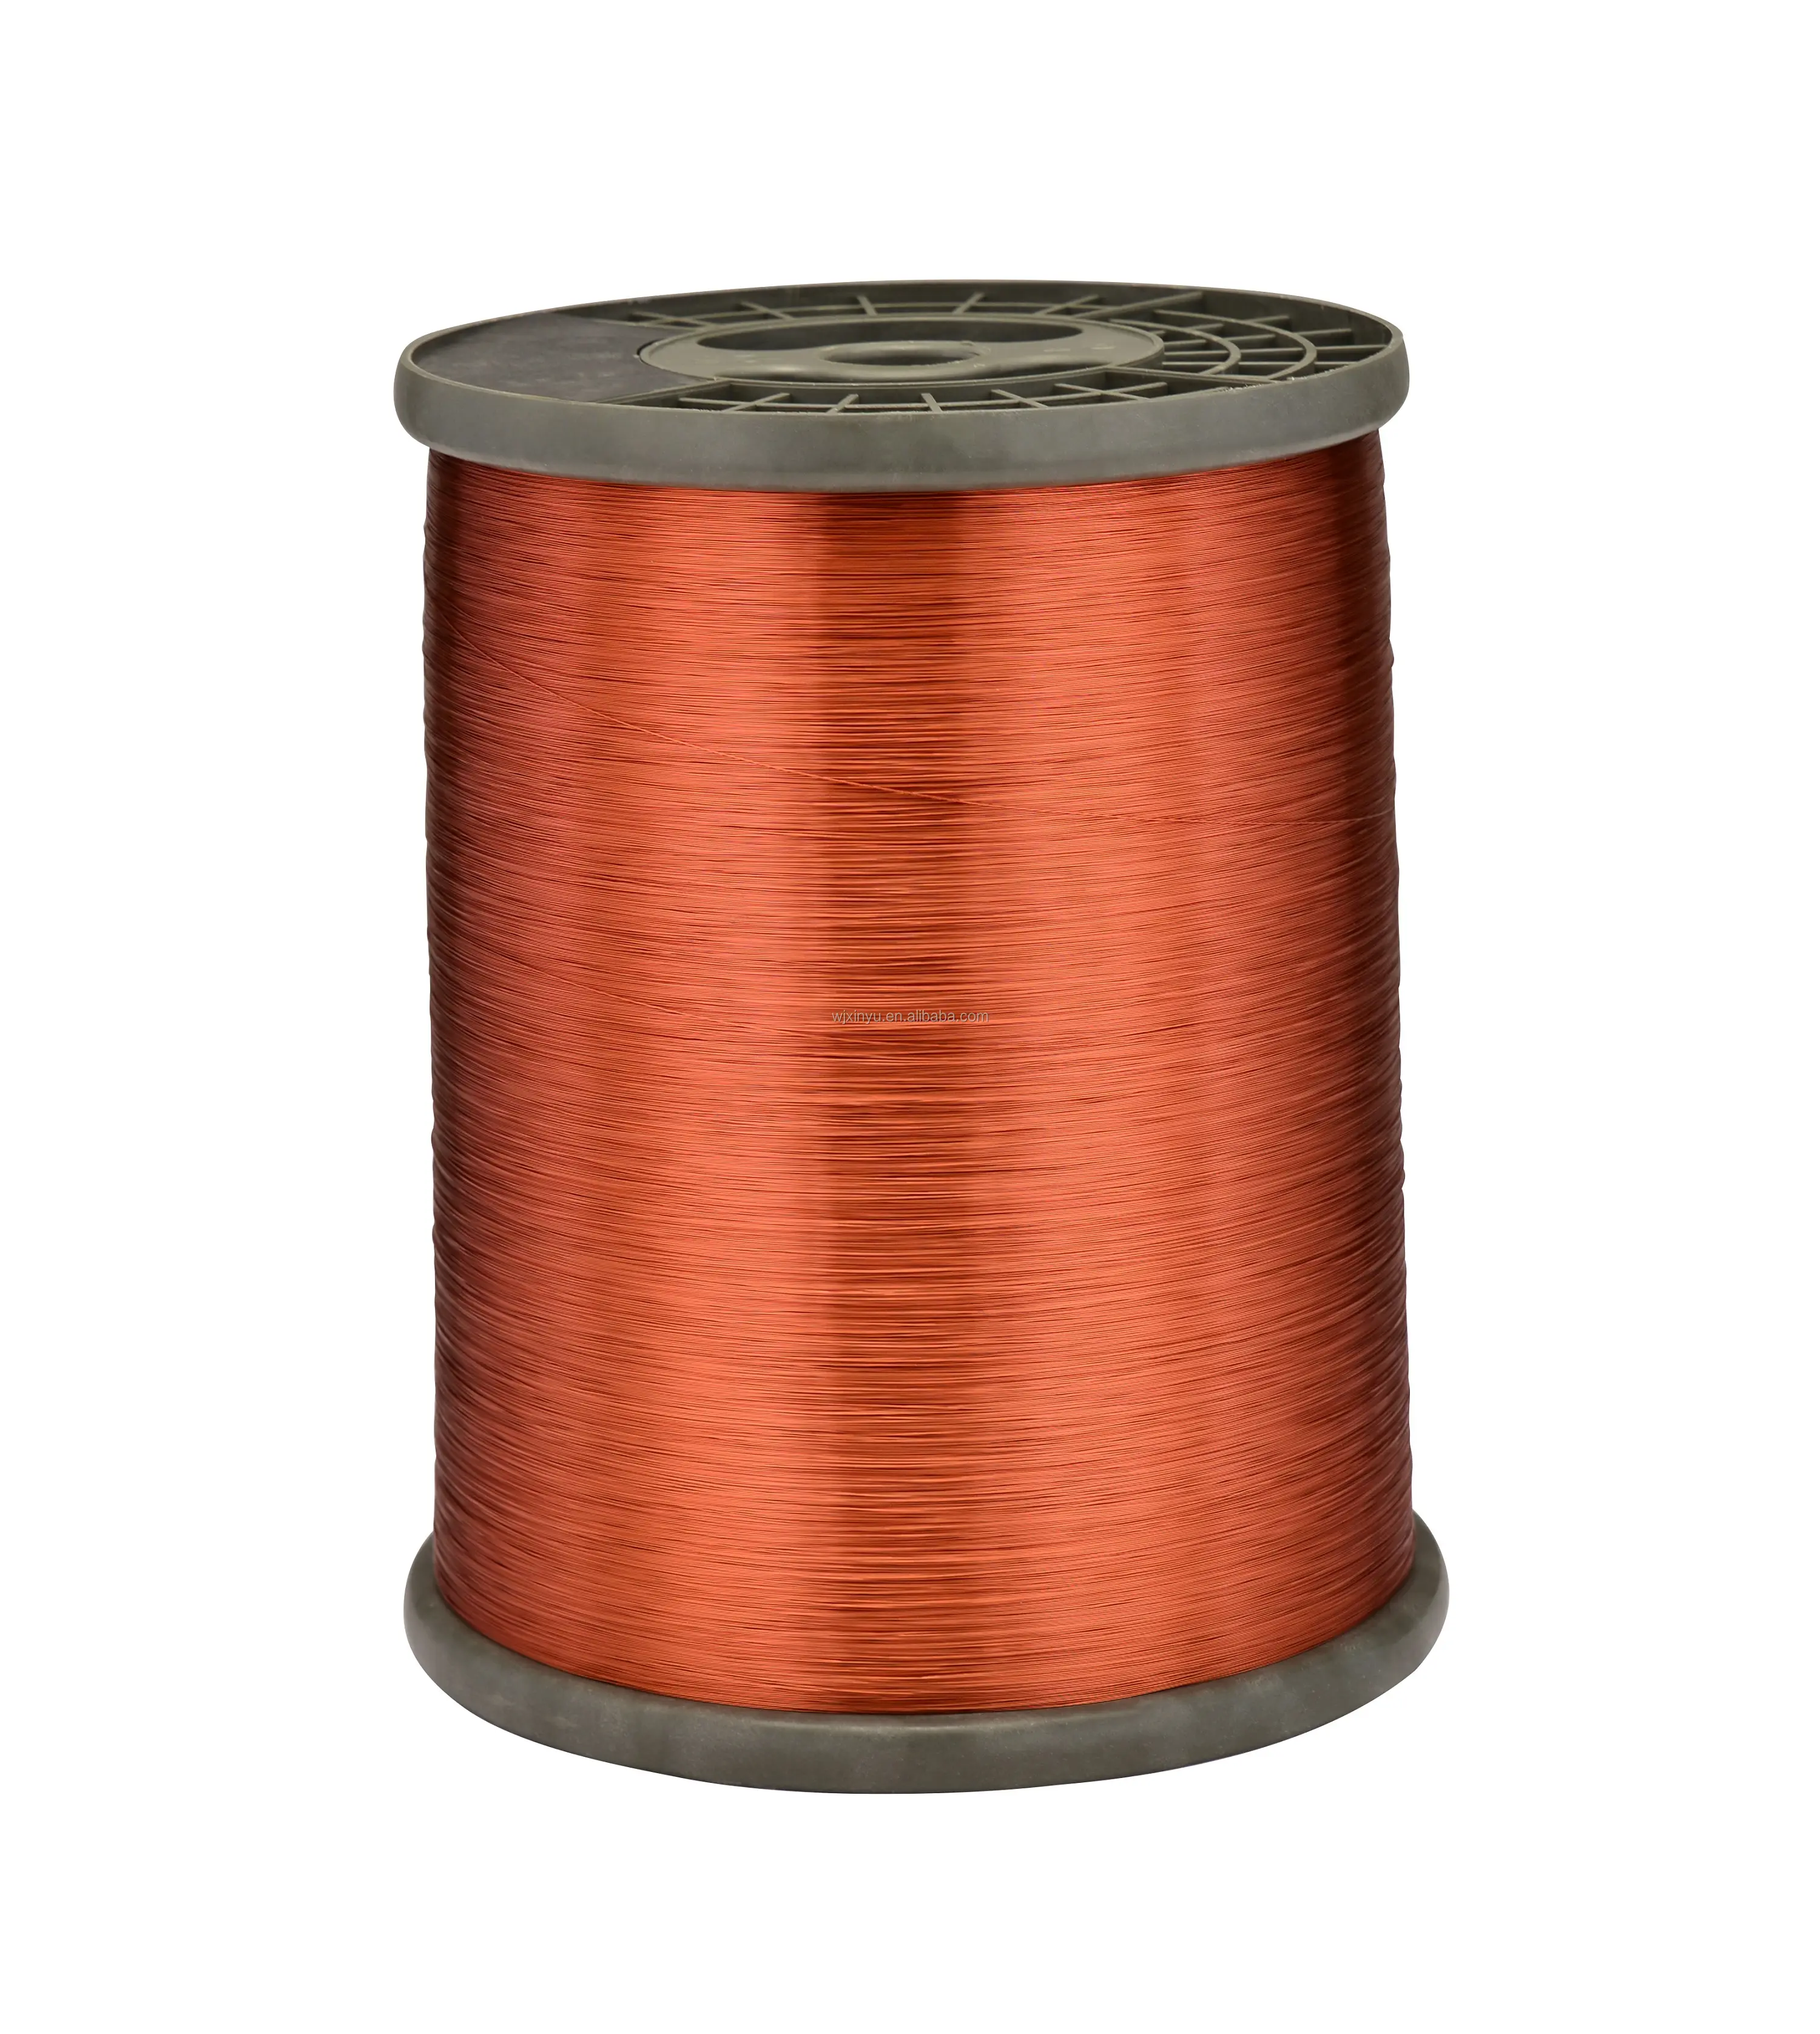 0.75mm ECCA wire, enamelled copper clad aluminum wire used in motorcycle magneto coil winding